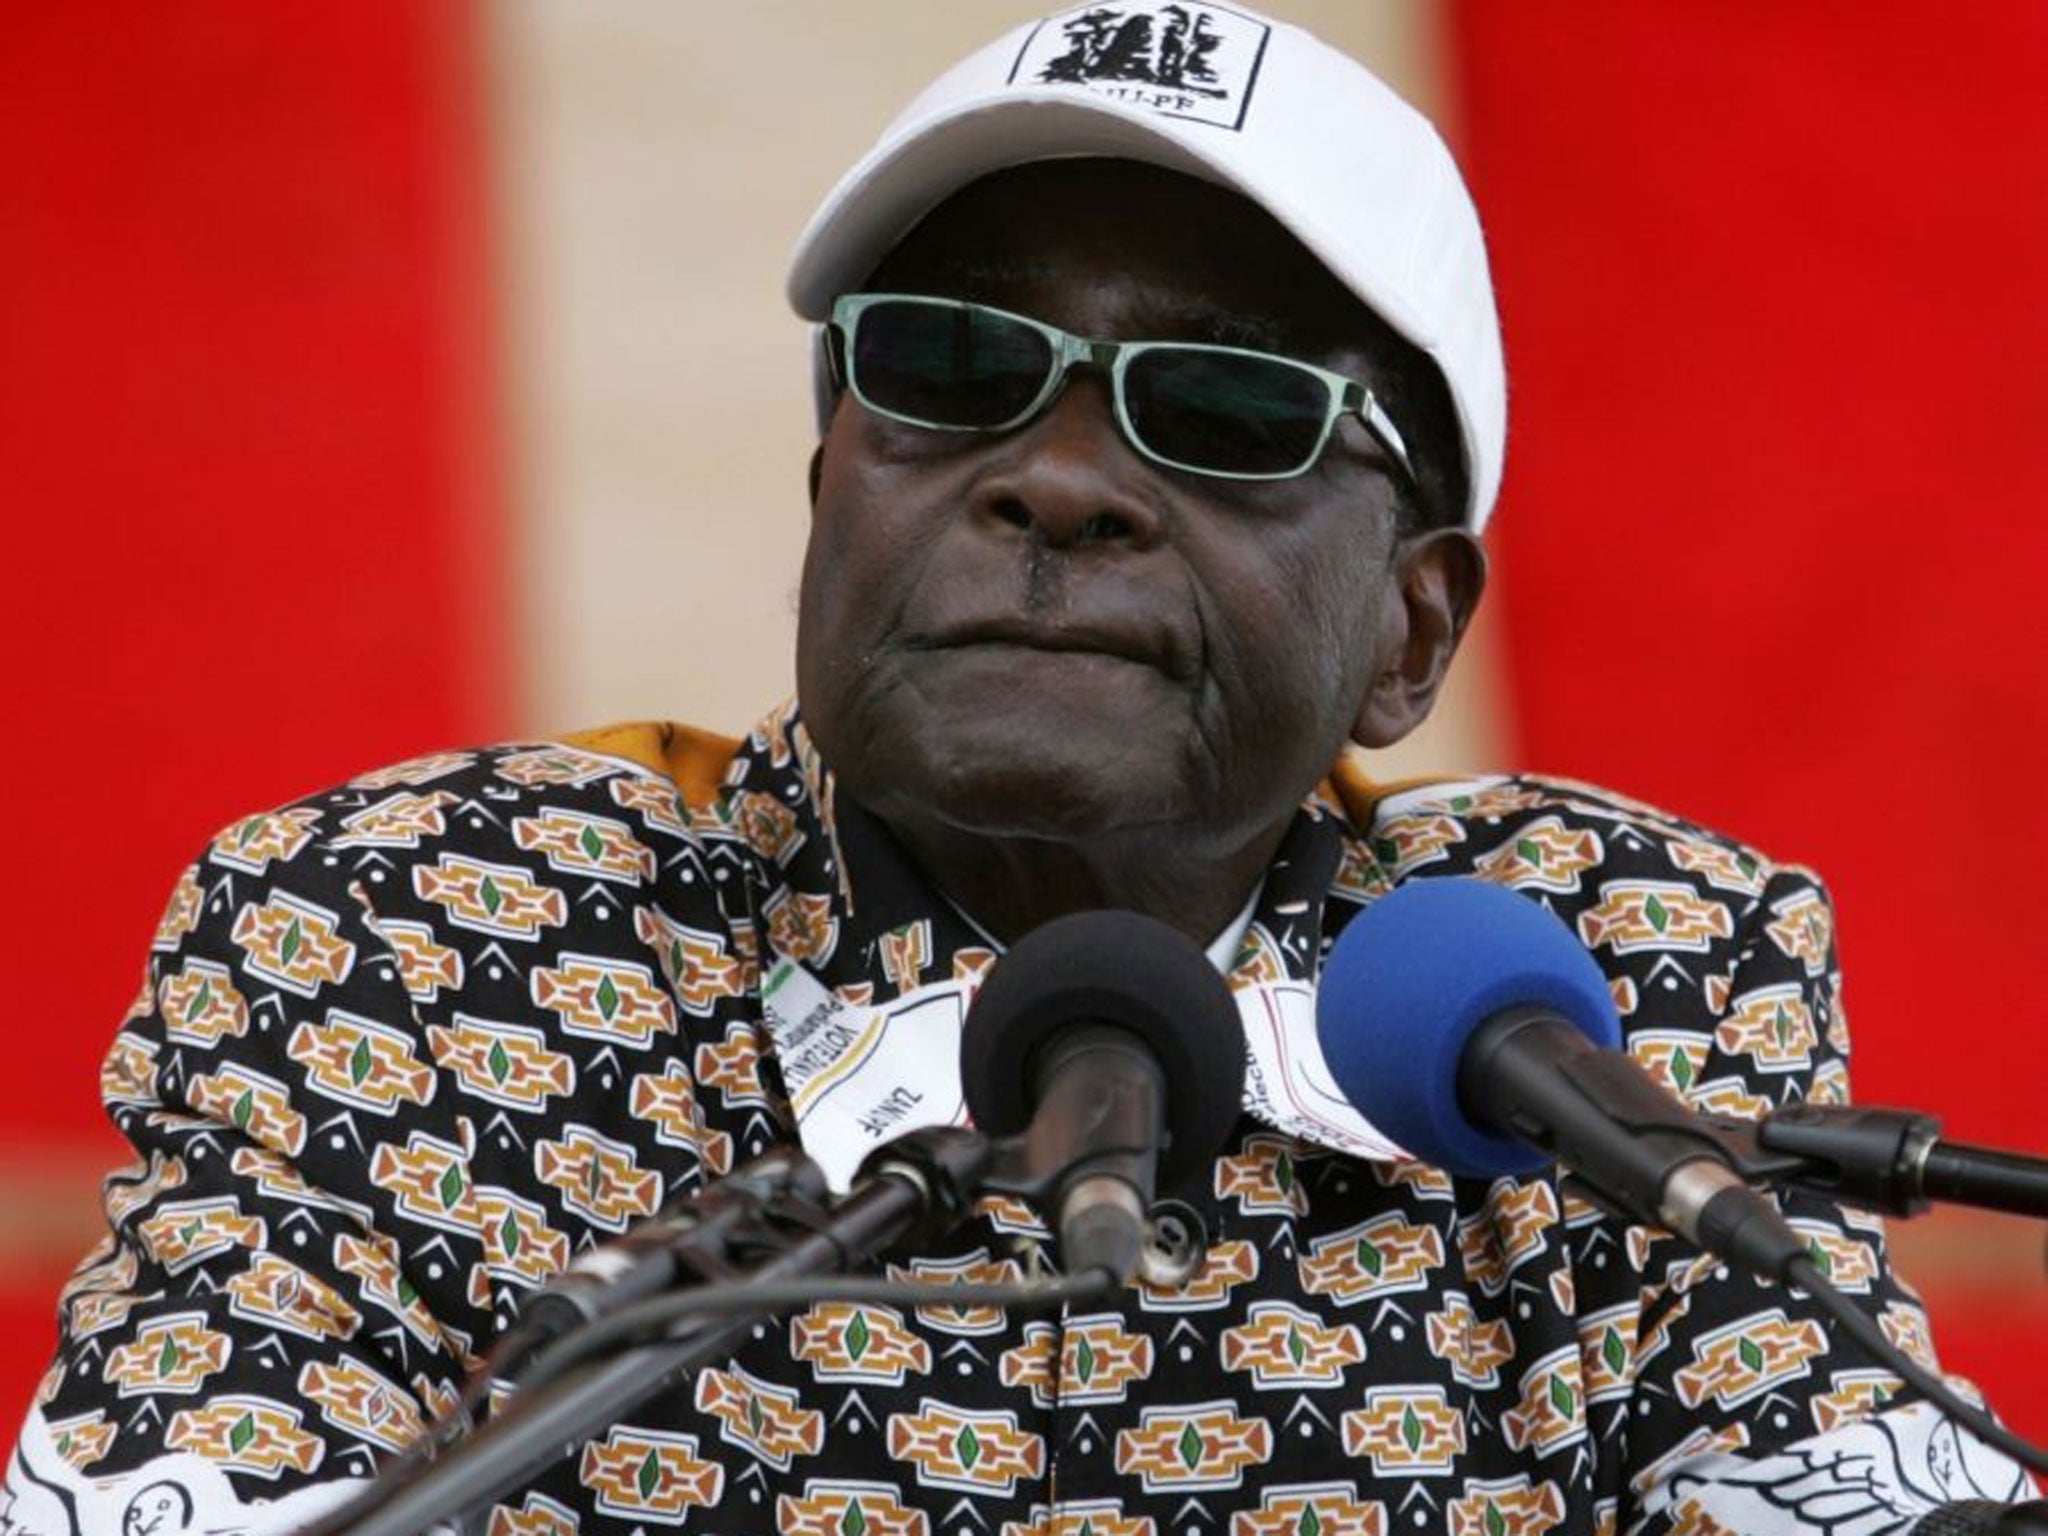 President Mugabe has reportedly offered $330,000 for information that could uncover a whistleblower in his regime